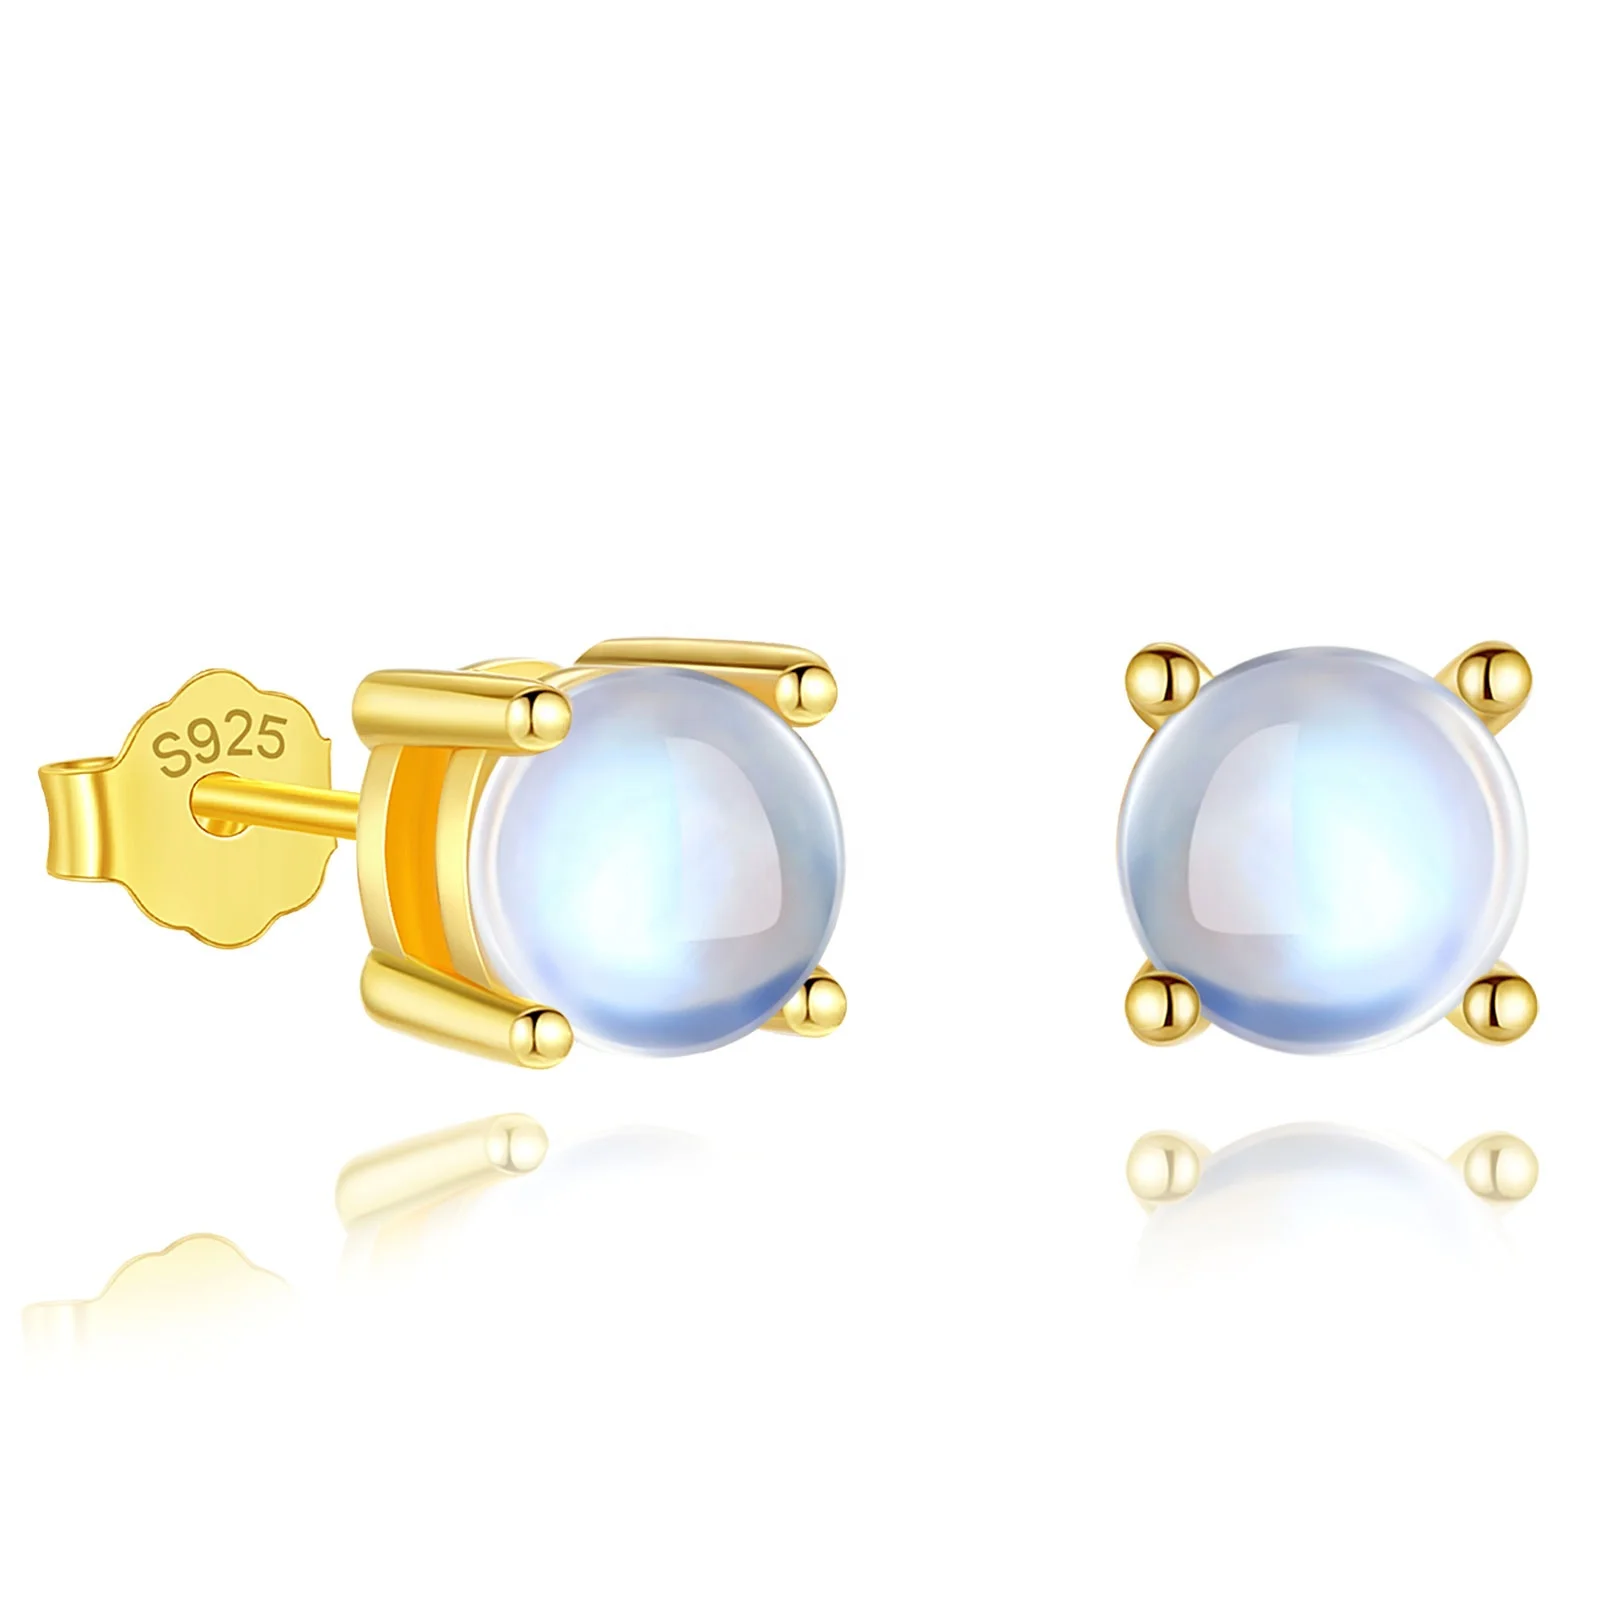 

Simple Elegant Jewelry 925 Sterling Silver 18K Gold Plated Small Round Shaped Moonstone Mini Stud Earrings for Women